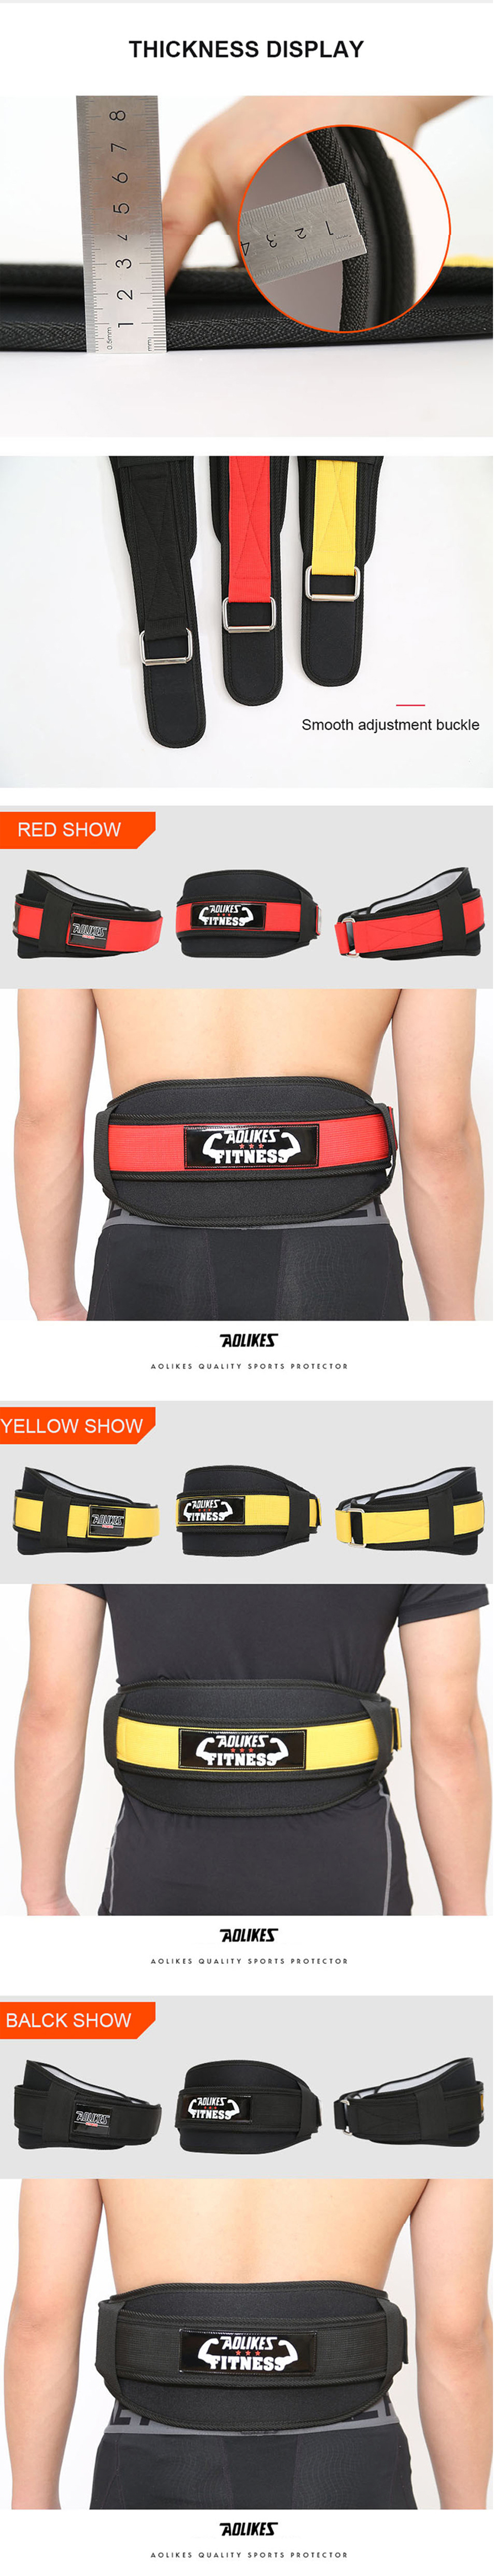 AOLIKES-Waist-Trainer-Weightlifting-Squat-Training-Lumbar-Support-Band-Sport-Powerlifting-Belt-Fitne-1915710-4